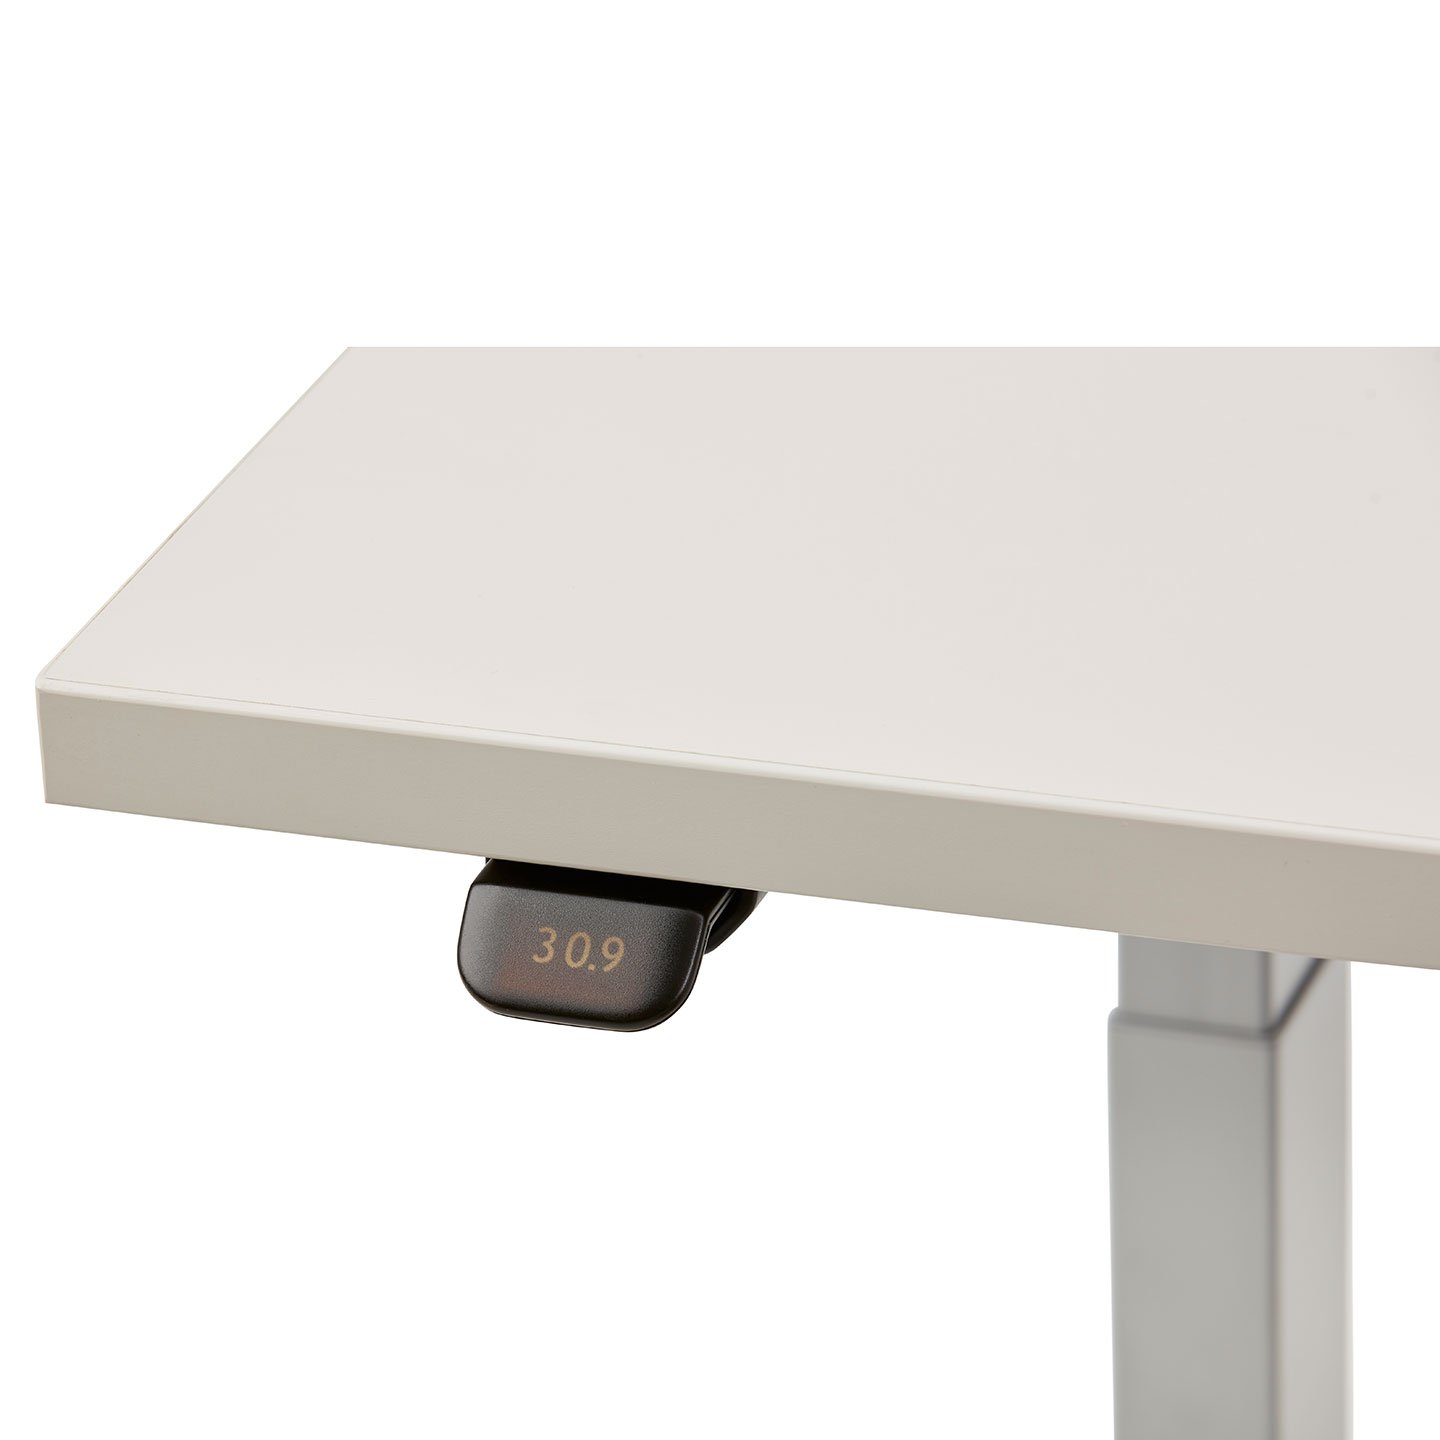 Haworth Upside Height Adjustable Table with chalk top and steel legs